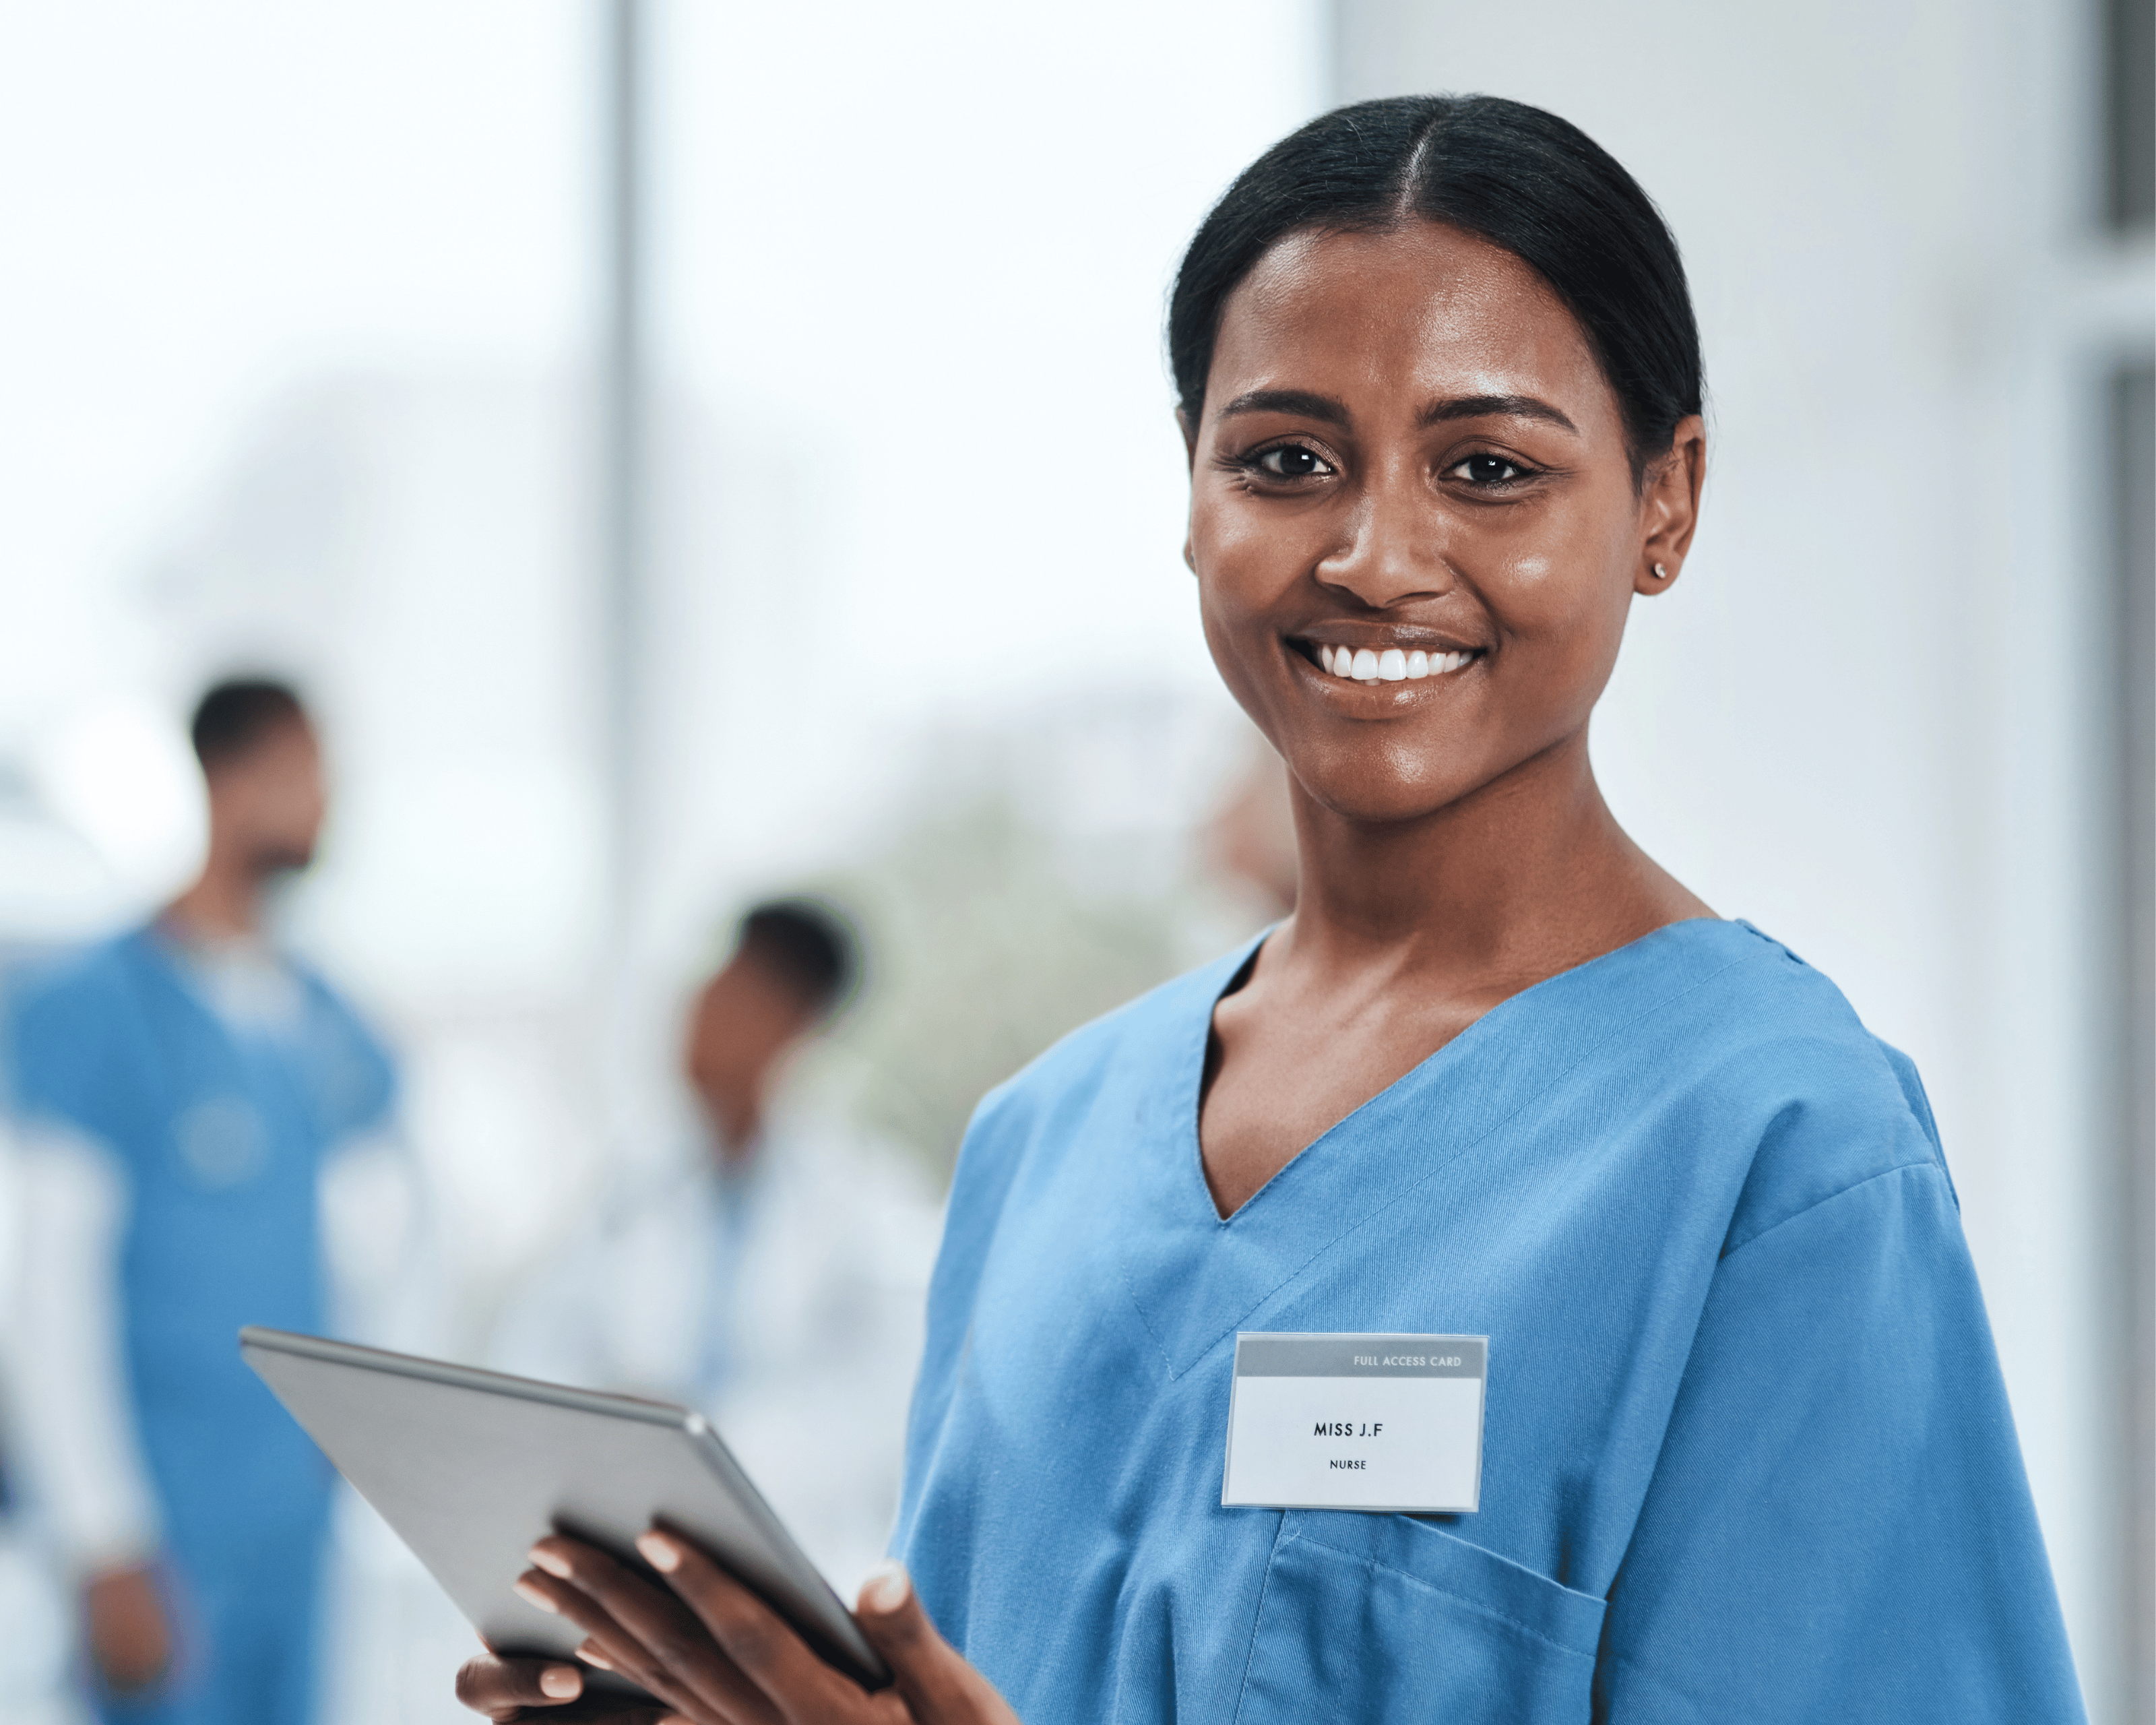 Apply for NMC registration with OET – the accepted English language test for International nurses applying to work in the UK.